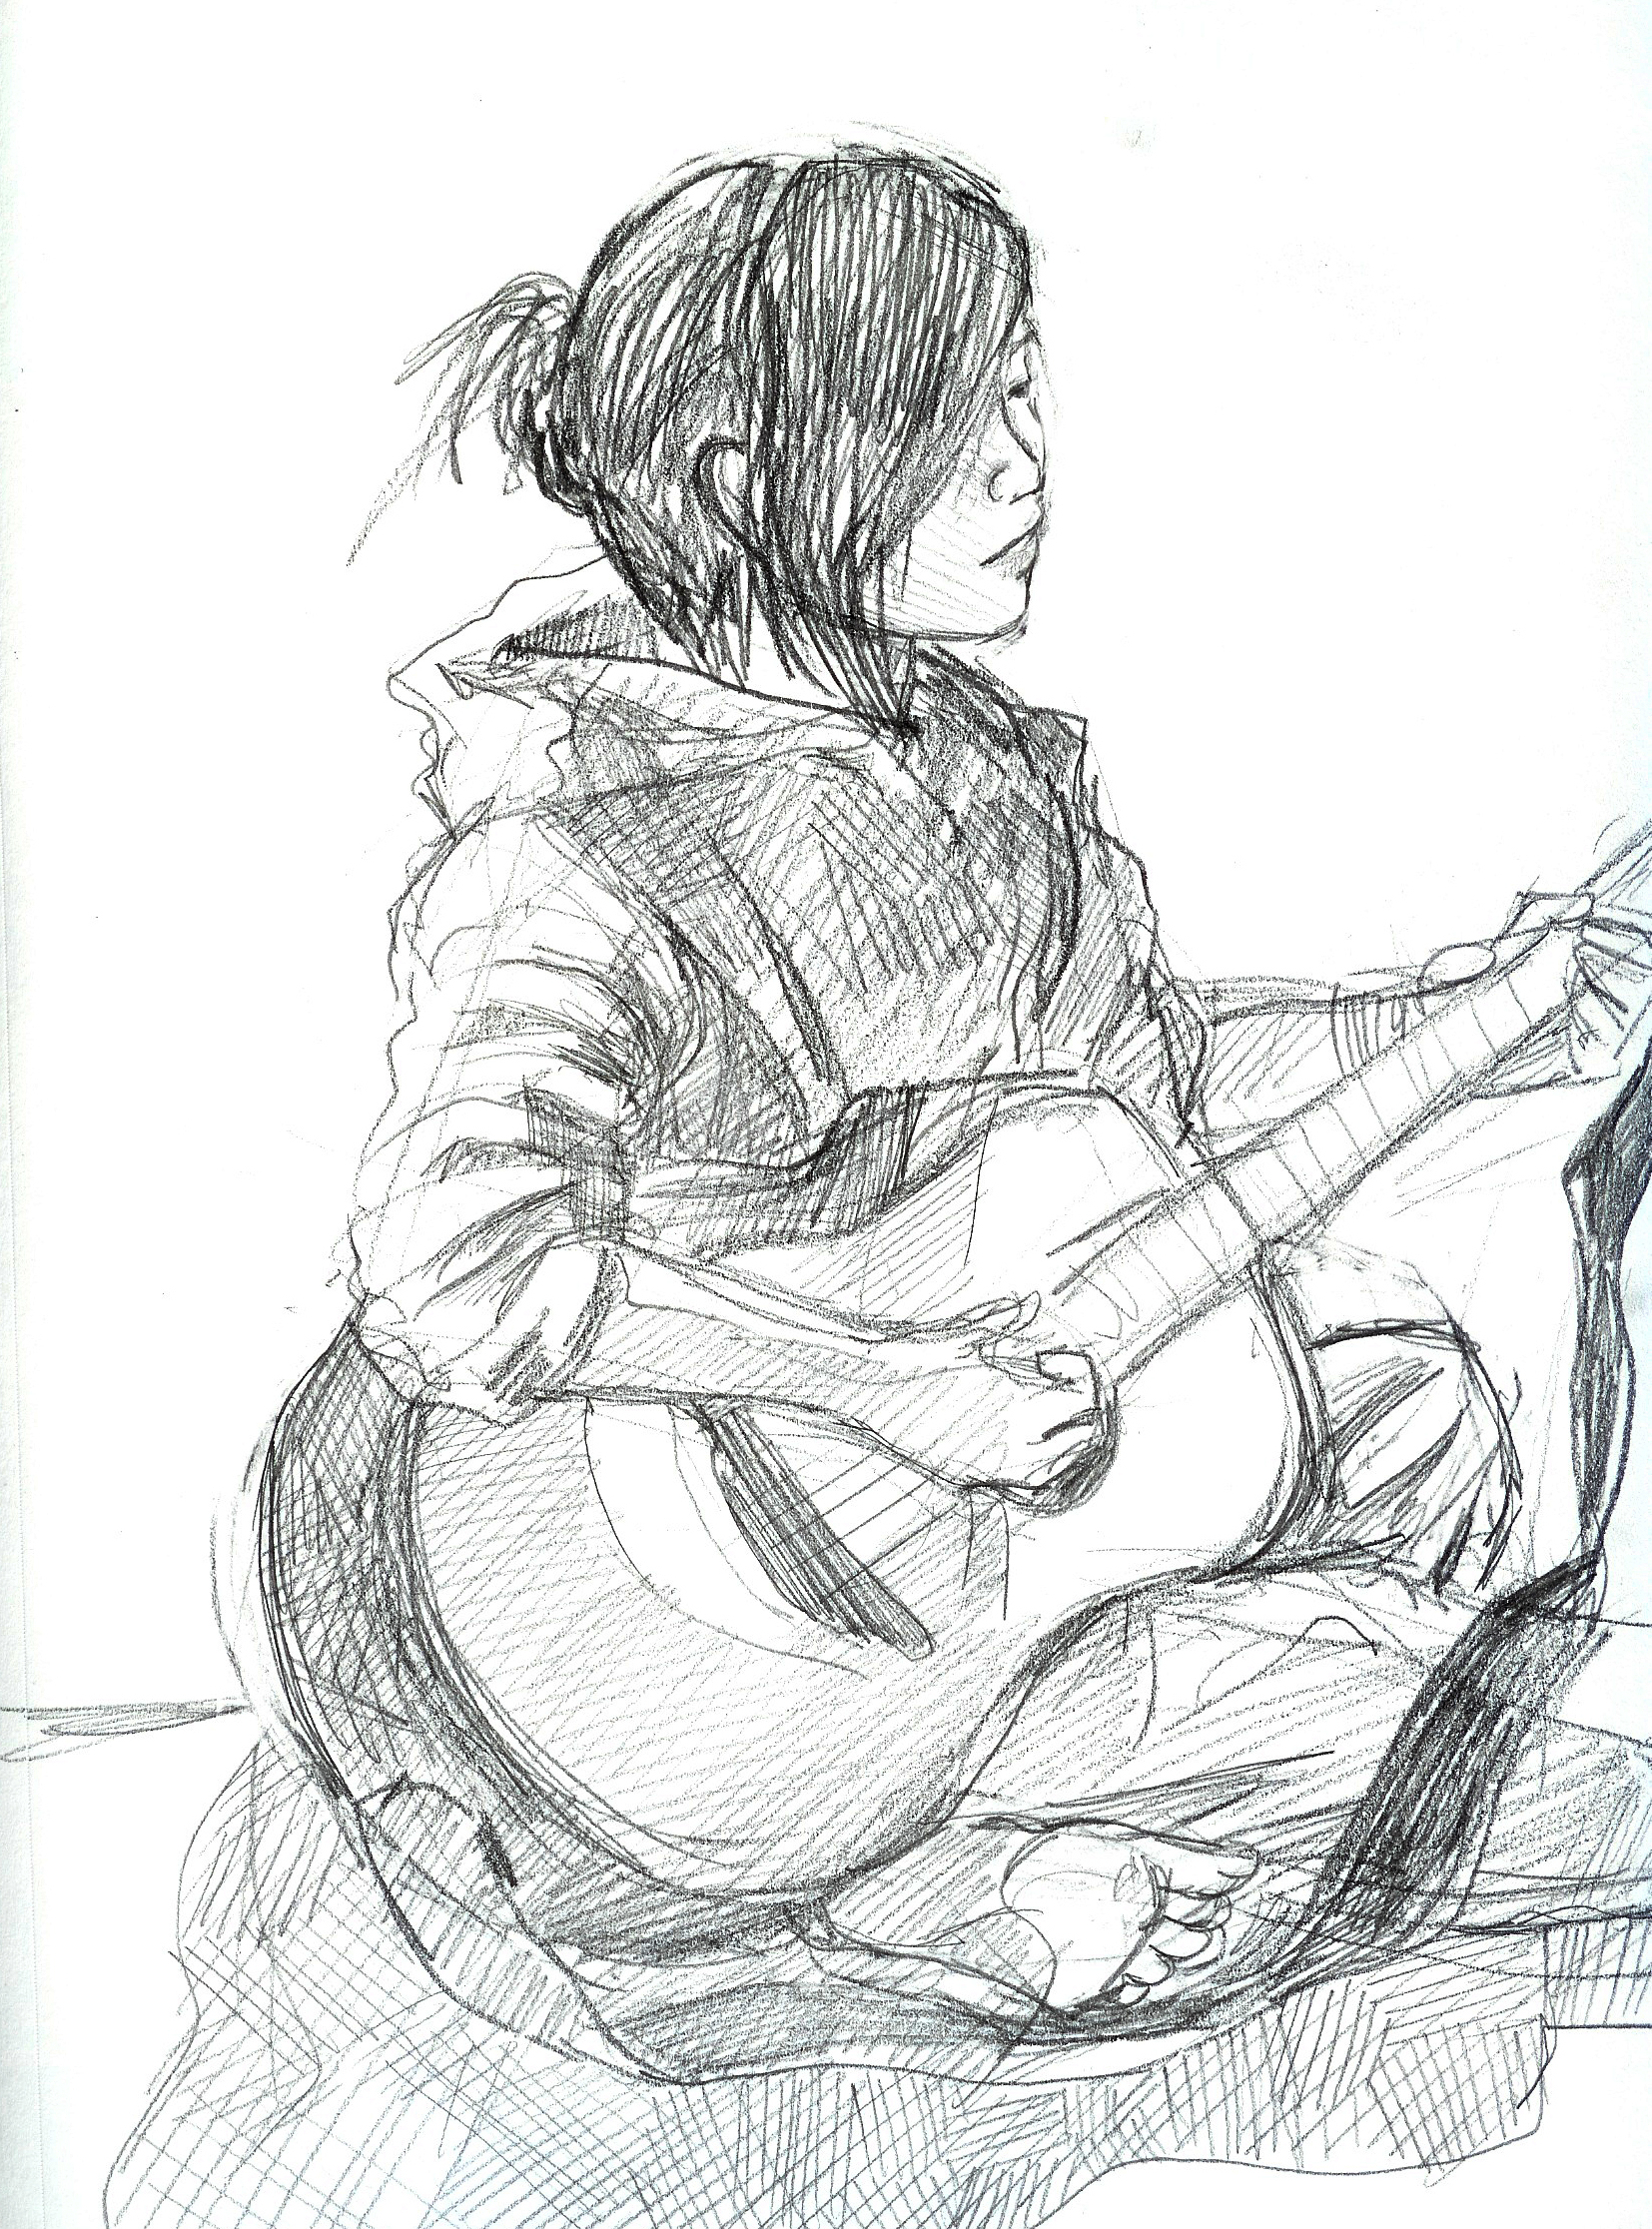 Playing Guitar Sketch At Paintingvalleycom Explore